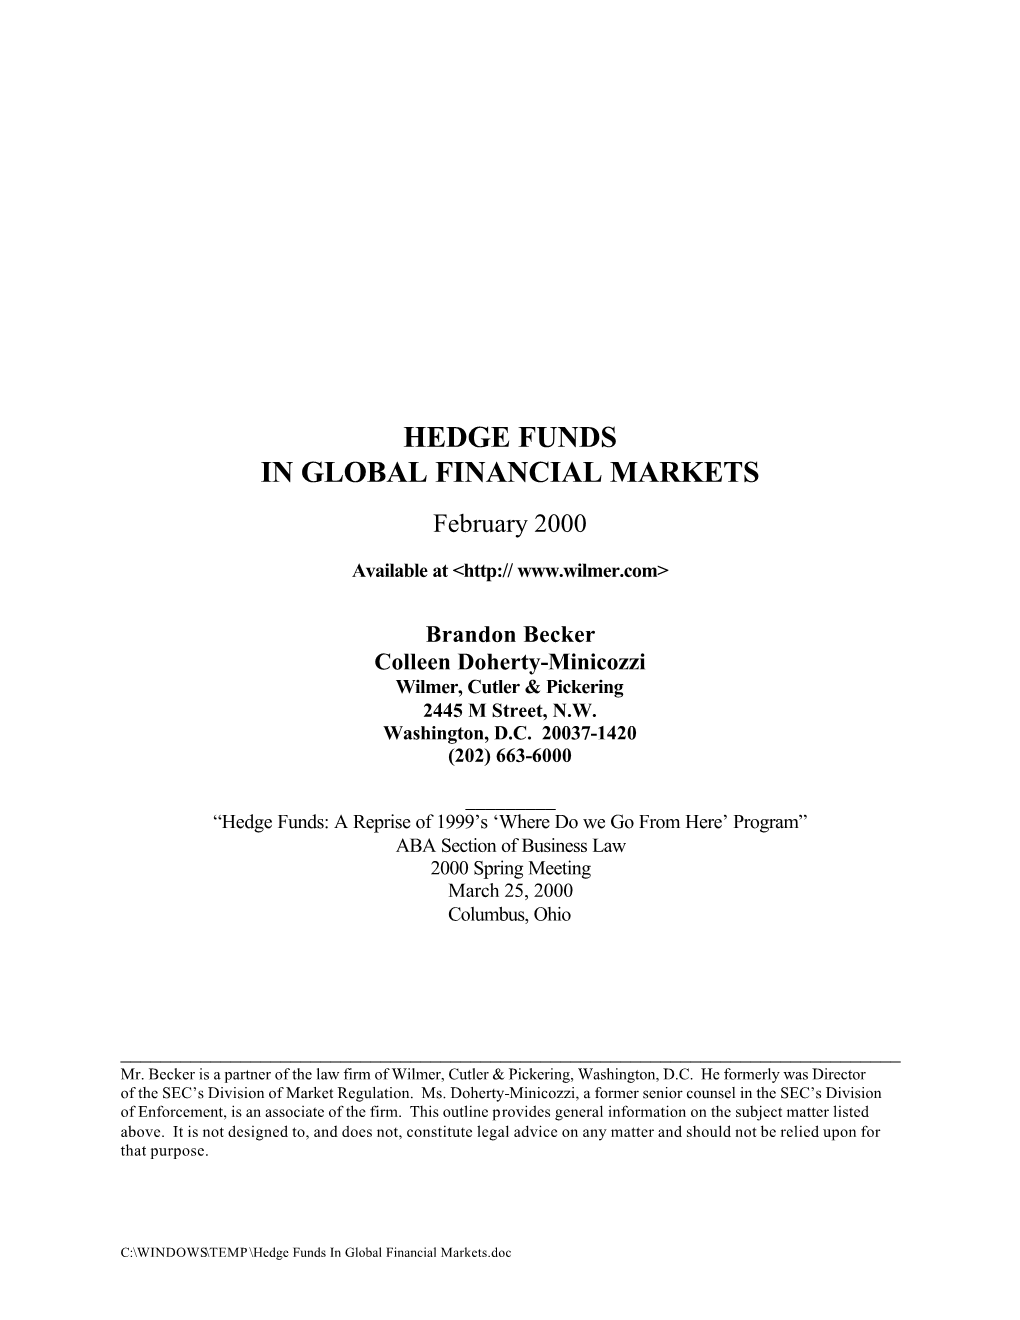 HEDGE FUNDS in GLOBAL FINANCIAL MARKETS February 2000